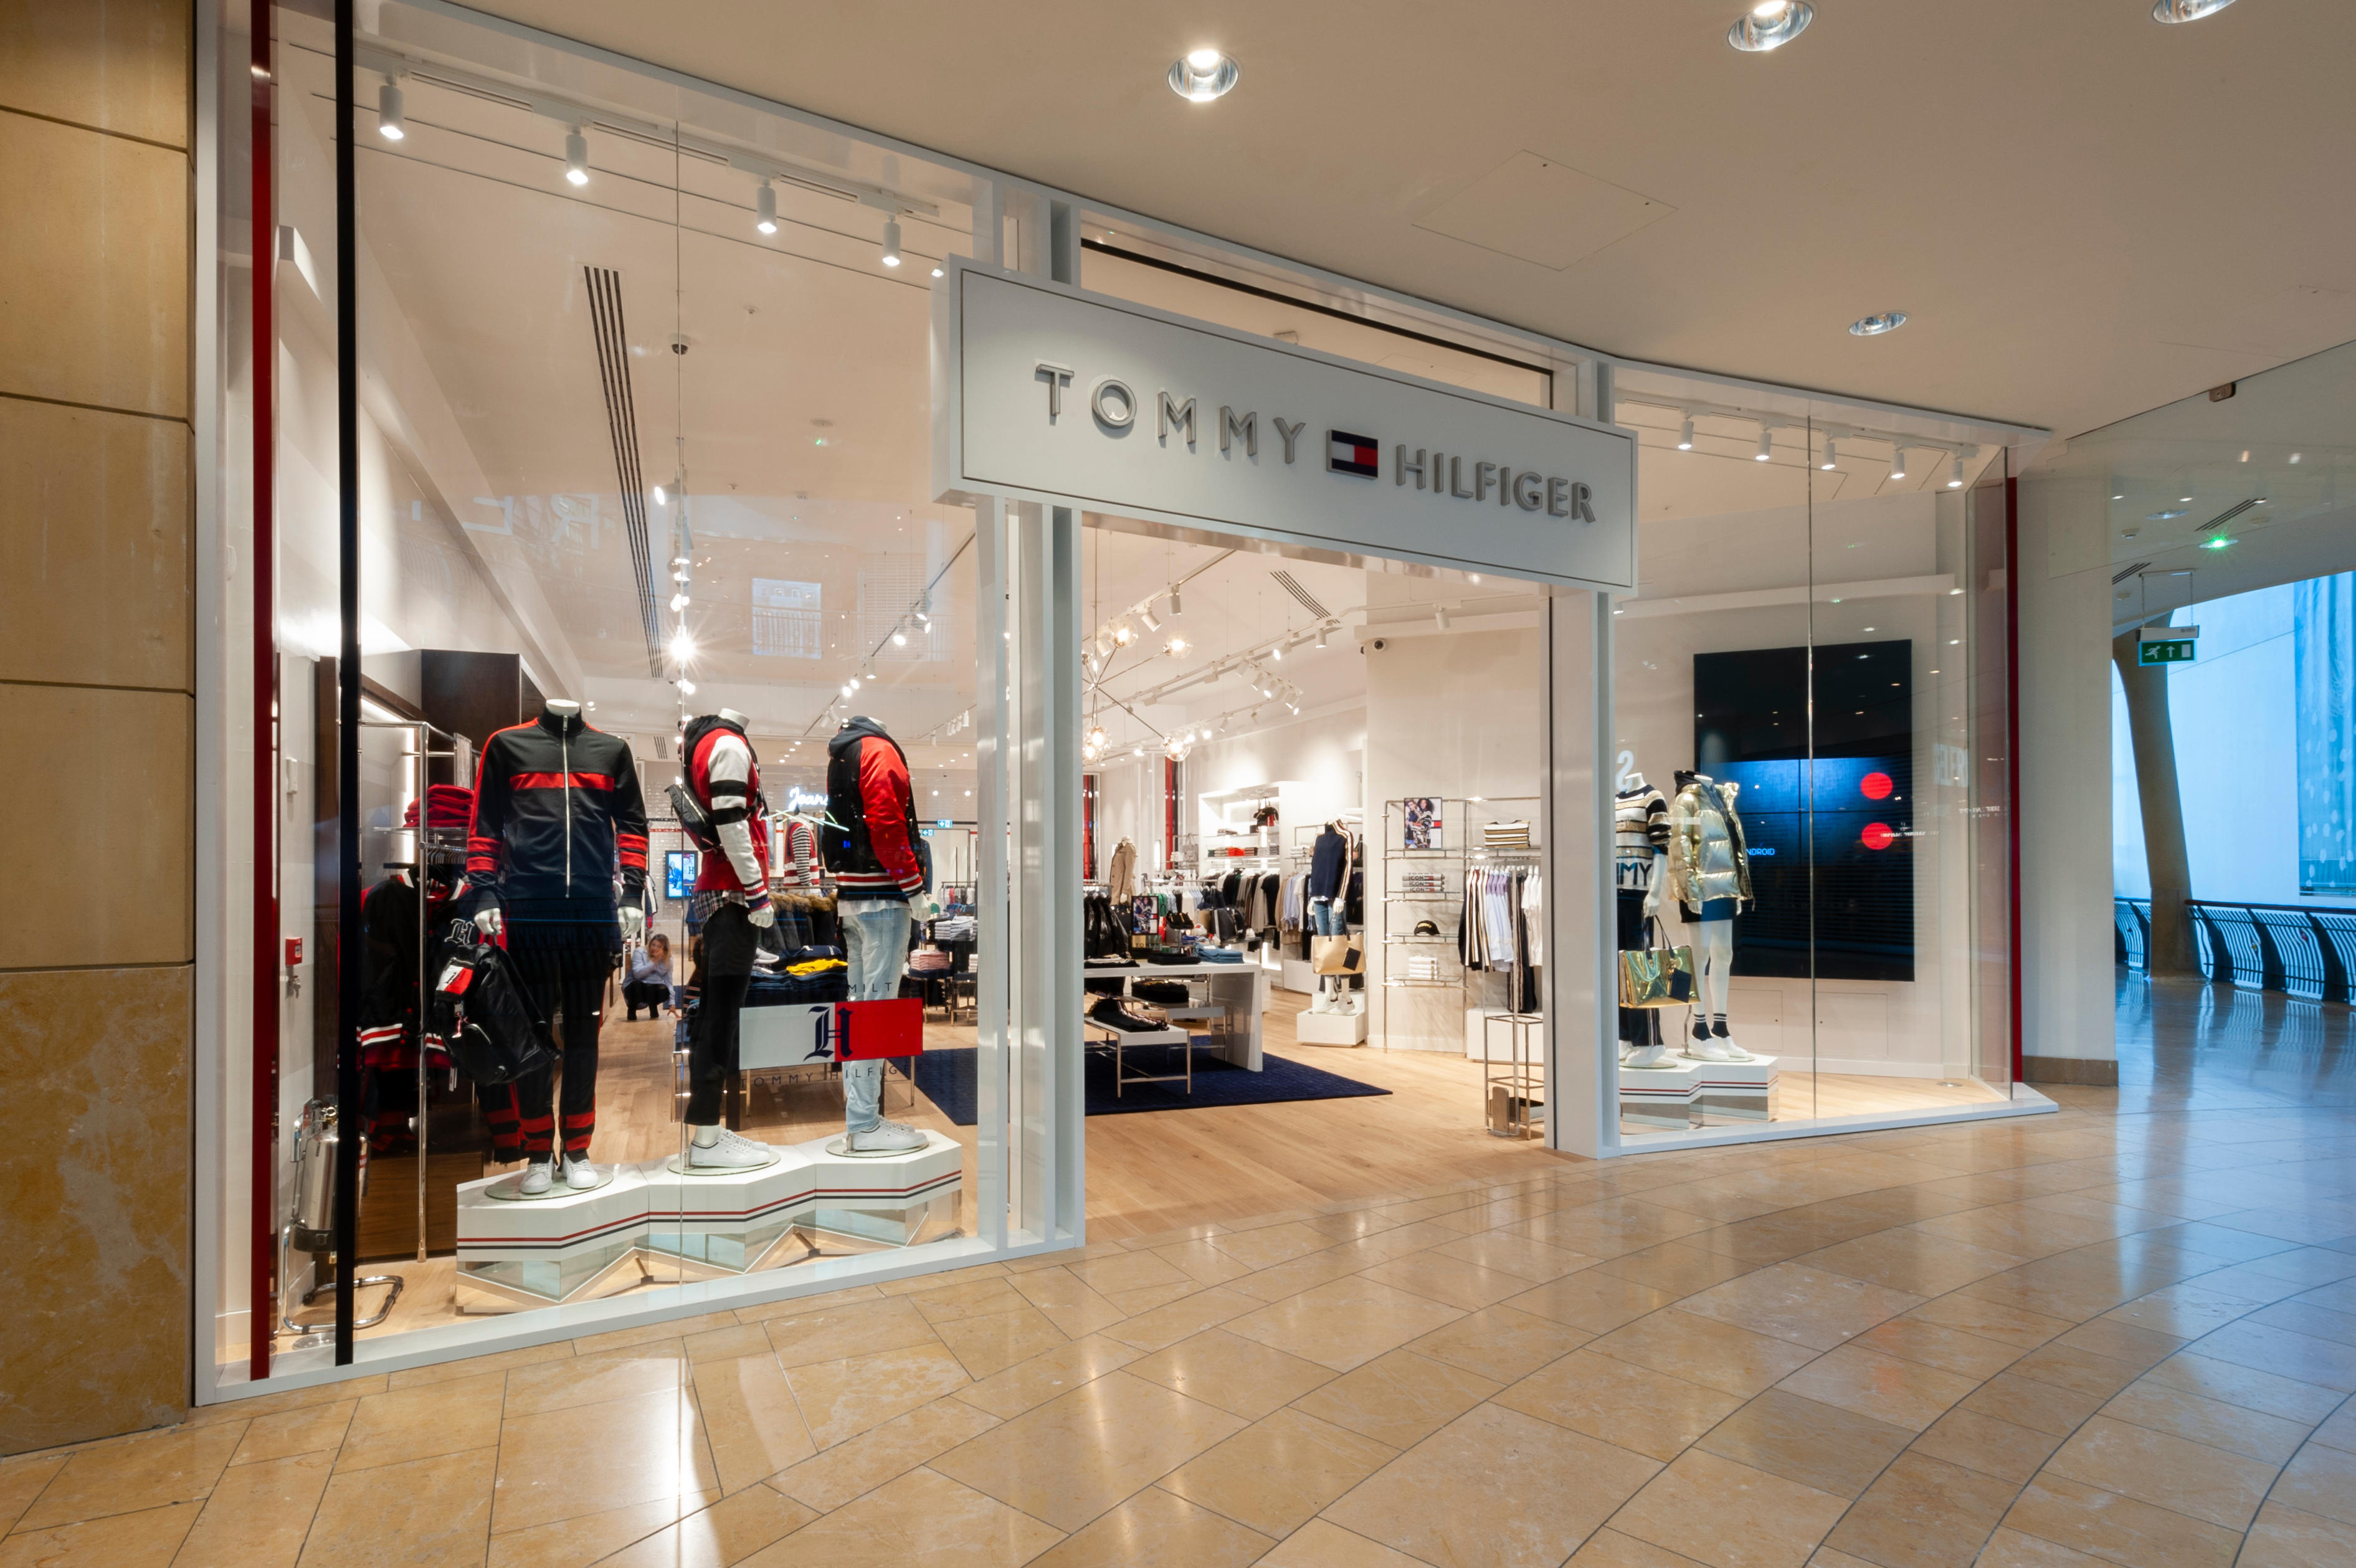 tommy hilfiger merry hill